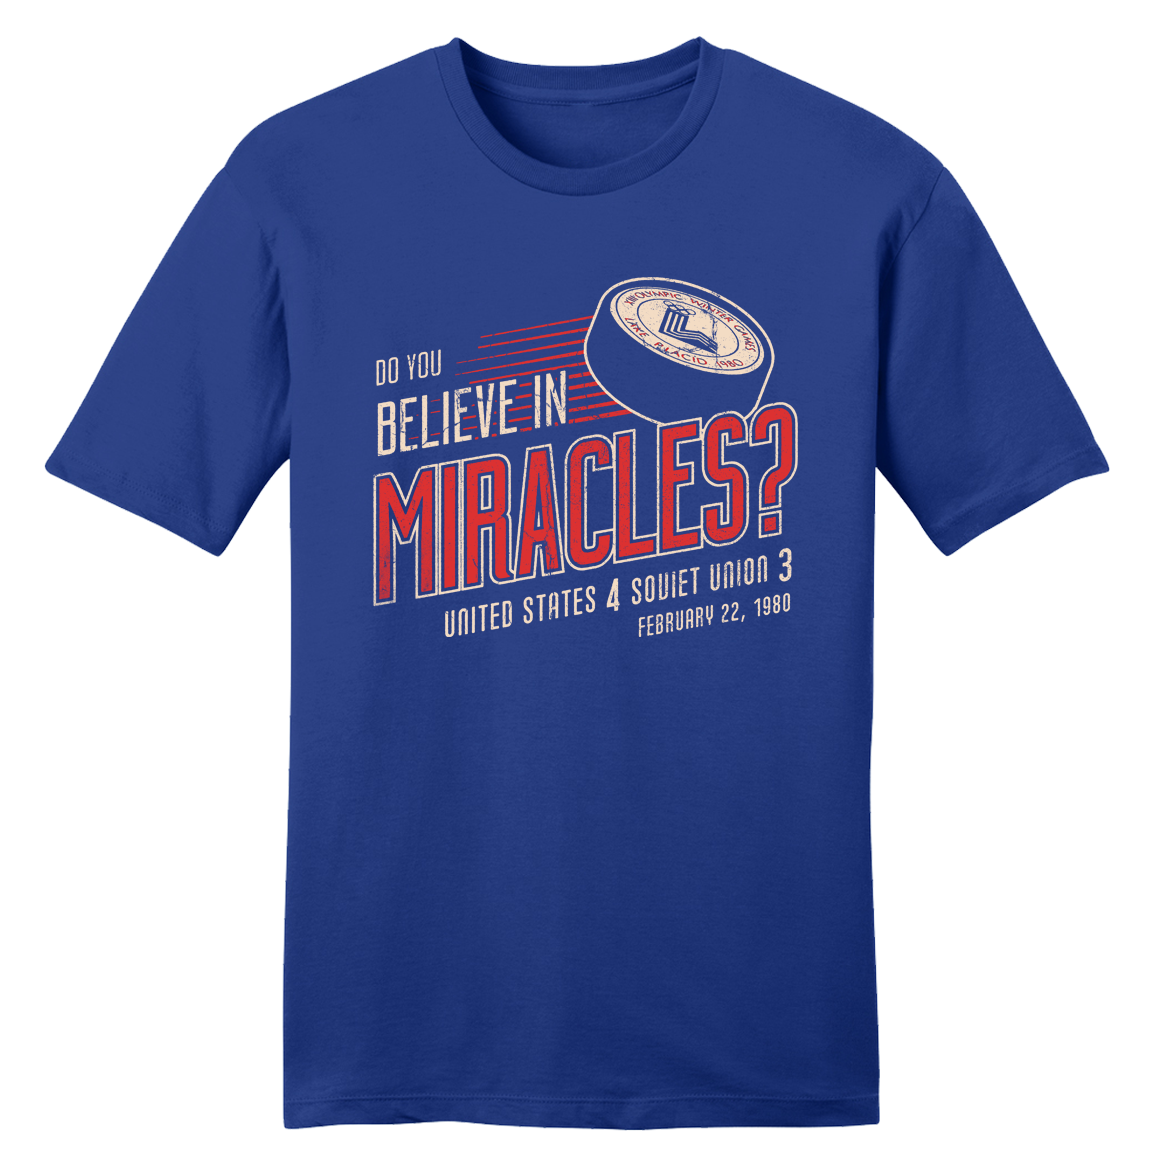 Do You Believe in Miracles? T-shirt